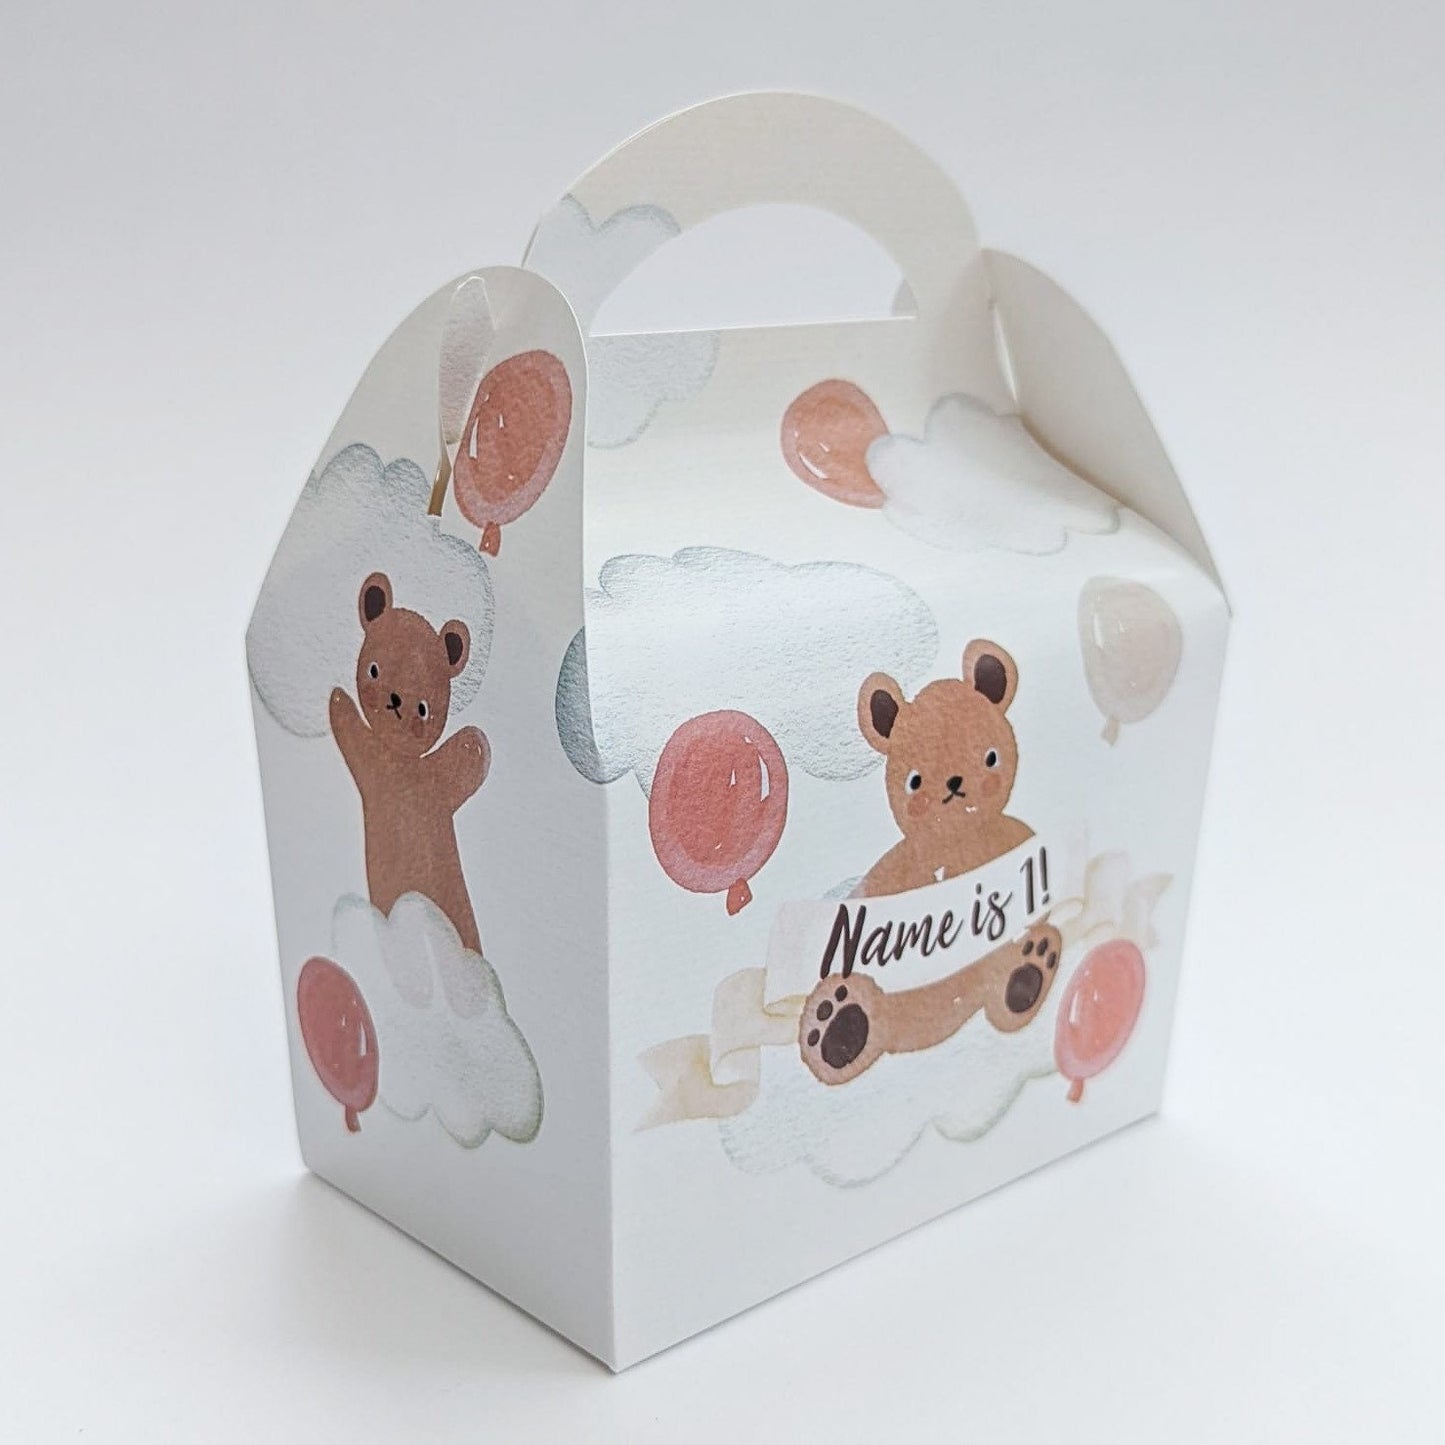 Watercolour Neutral Teddy Bears and Balloons Personalised Children’s Party Box Gift Bag Favour